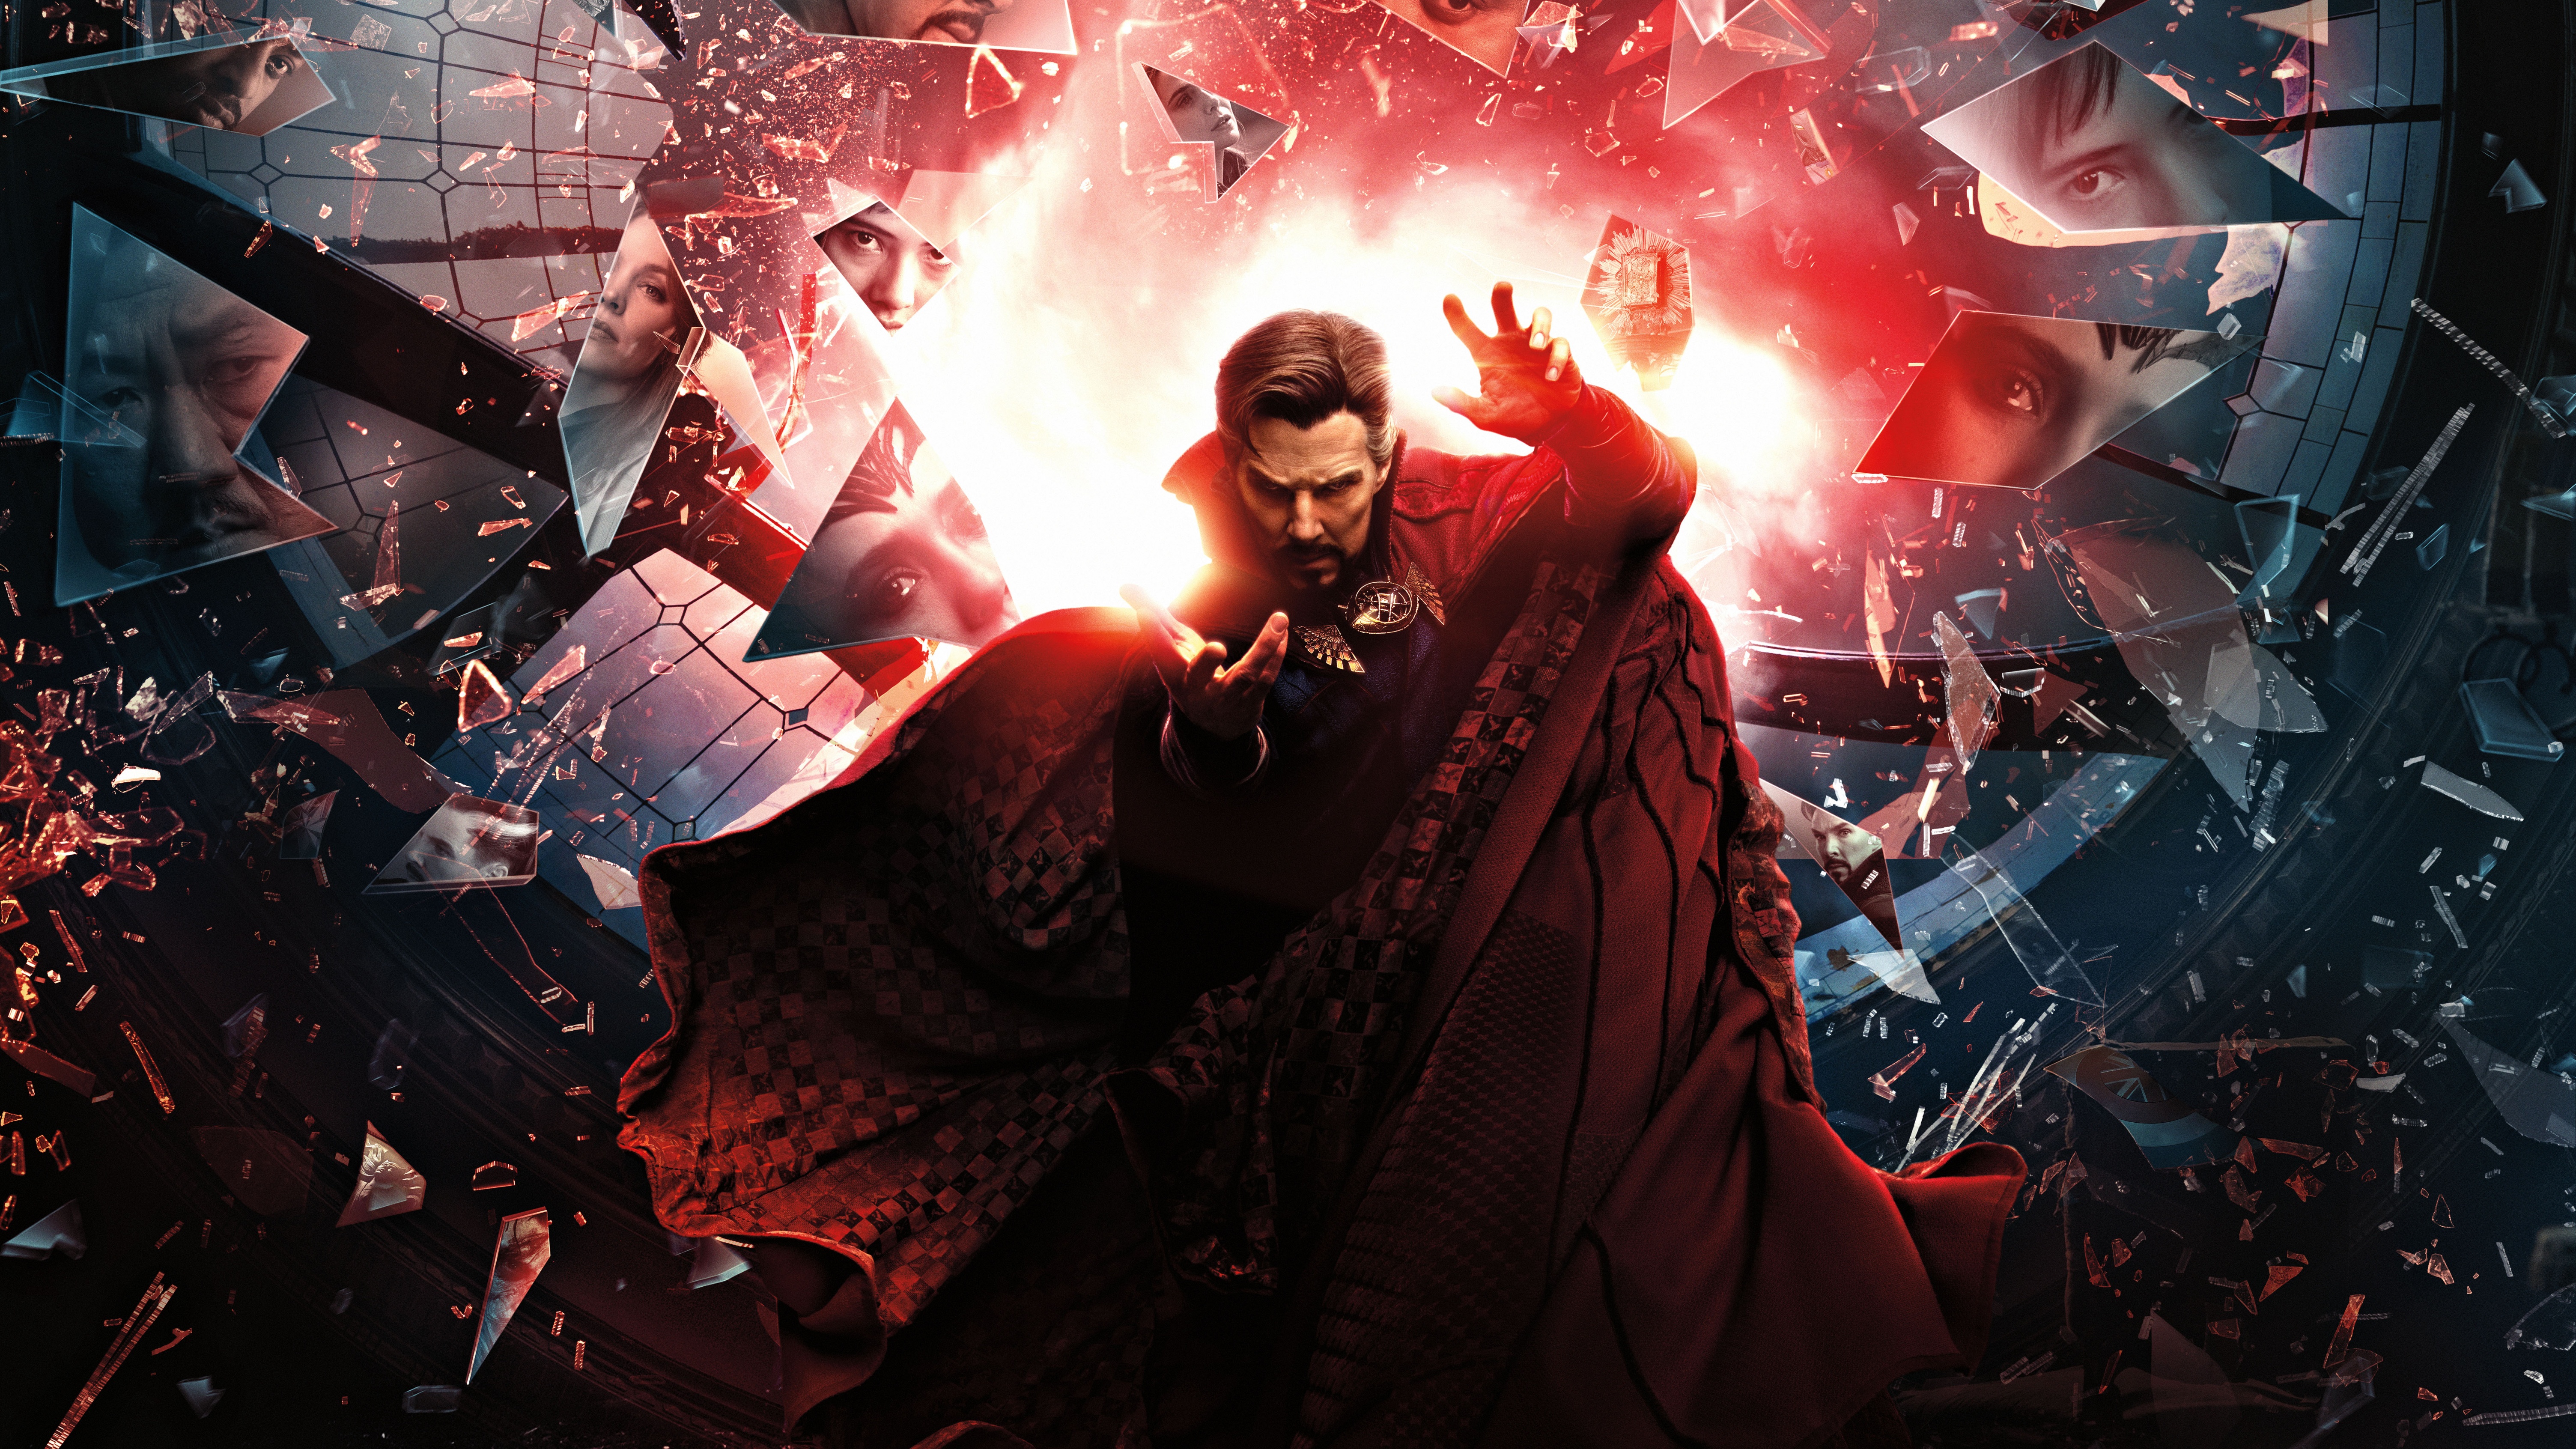 Download Super-power your phone with Doctor Strange Wallpaper | Wallpapers .com